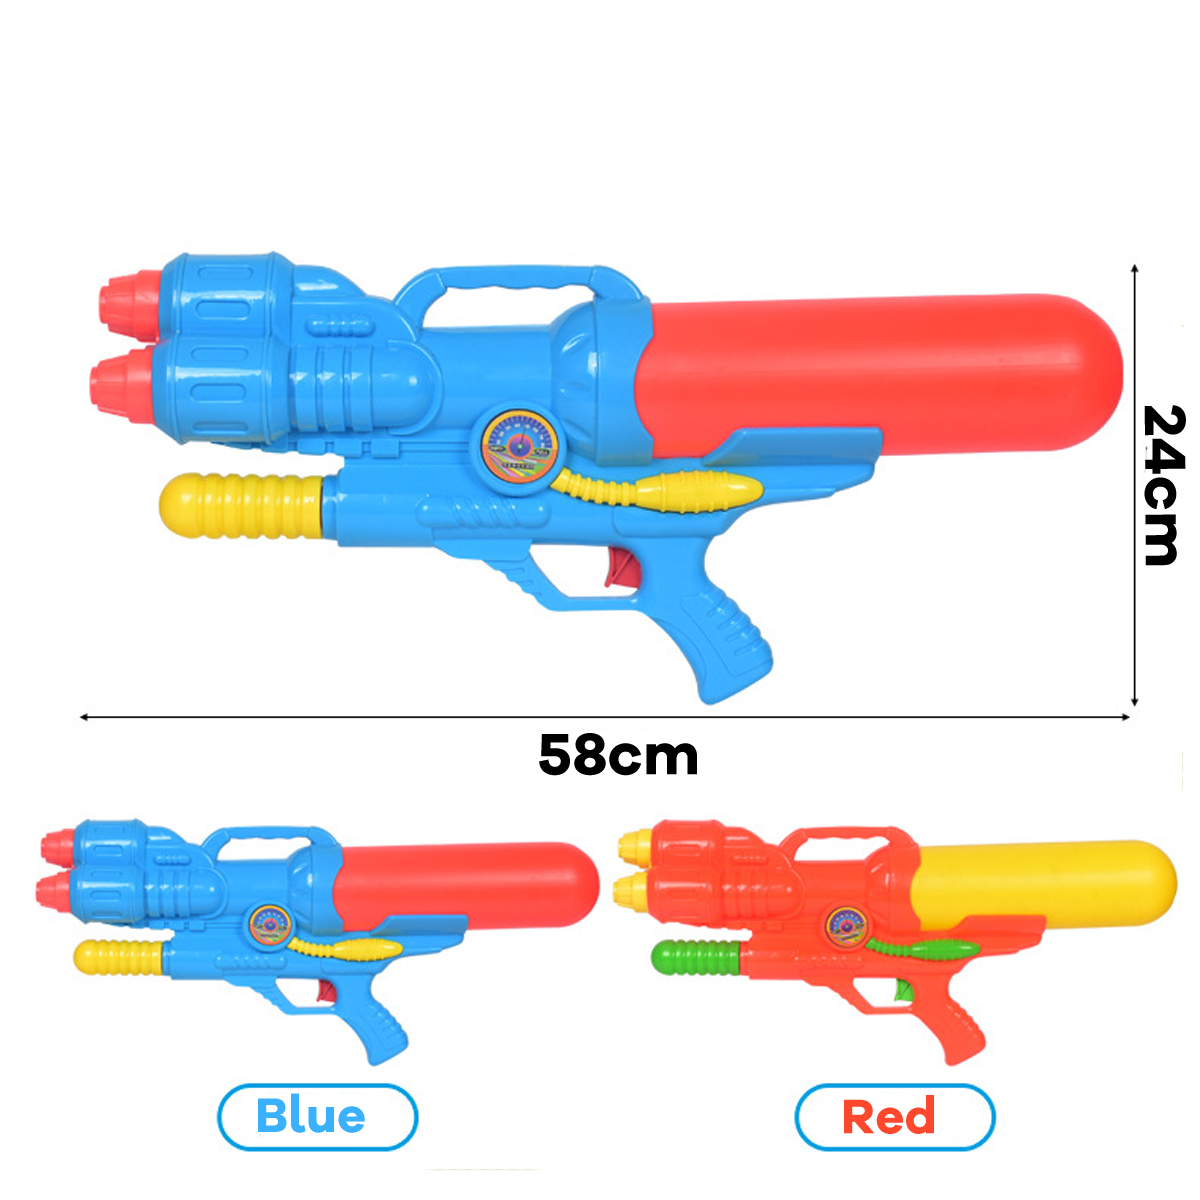 1500ml-Red-Or-Blue-Toy-Water-Sprinkler-With-A-Range-Of-7-9m-Plastic-Water-Sprinkler-For-Children-Bea-1703042-15